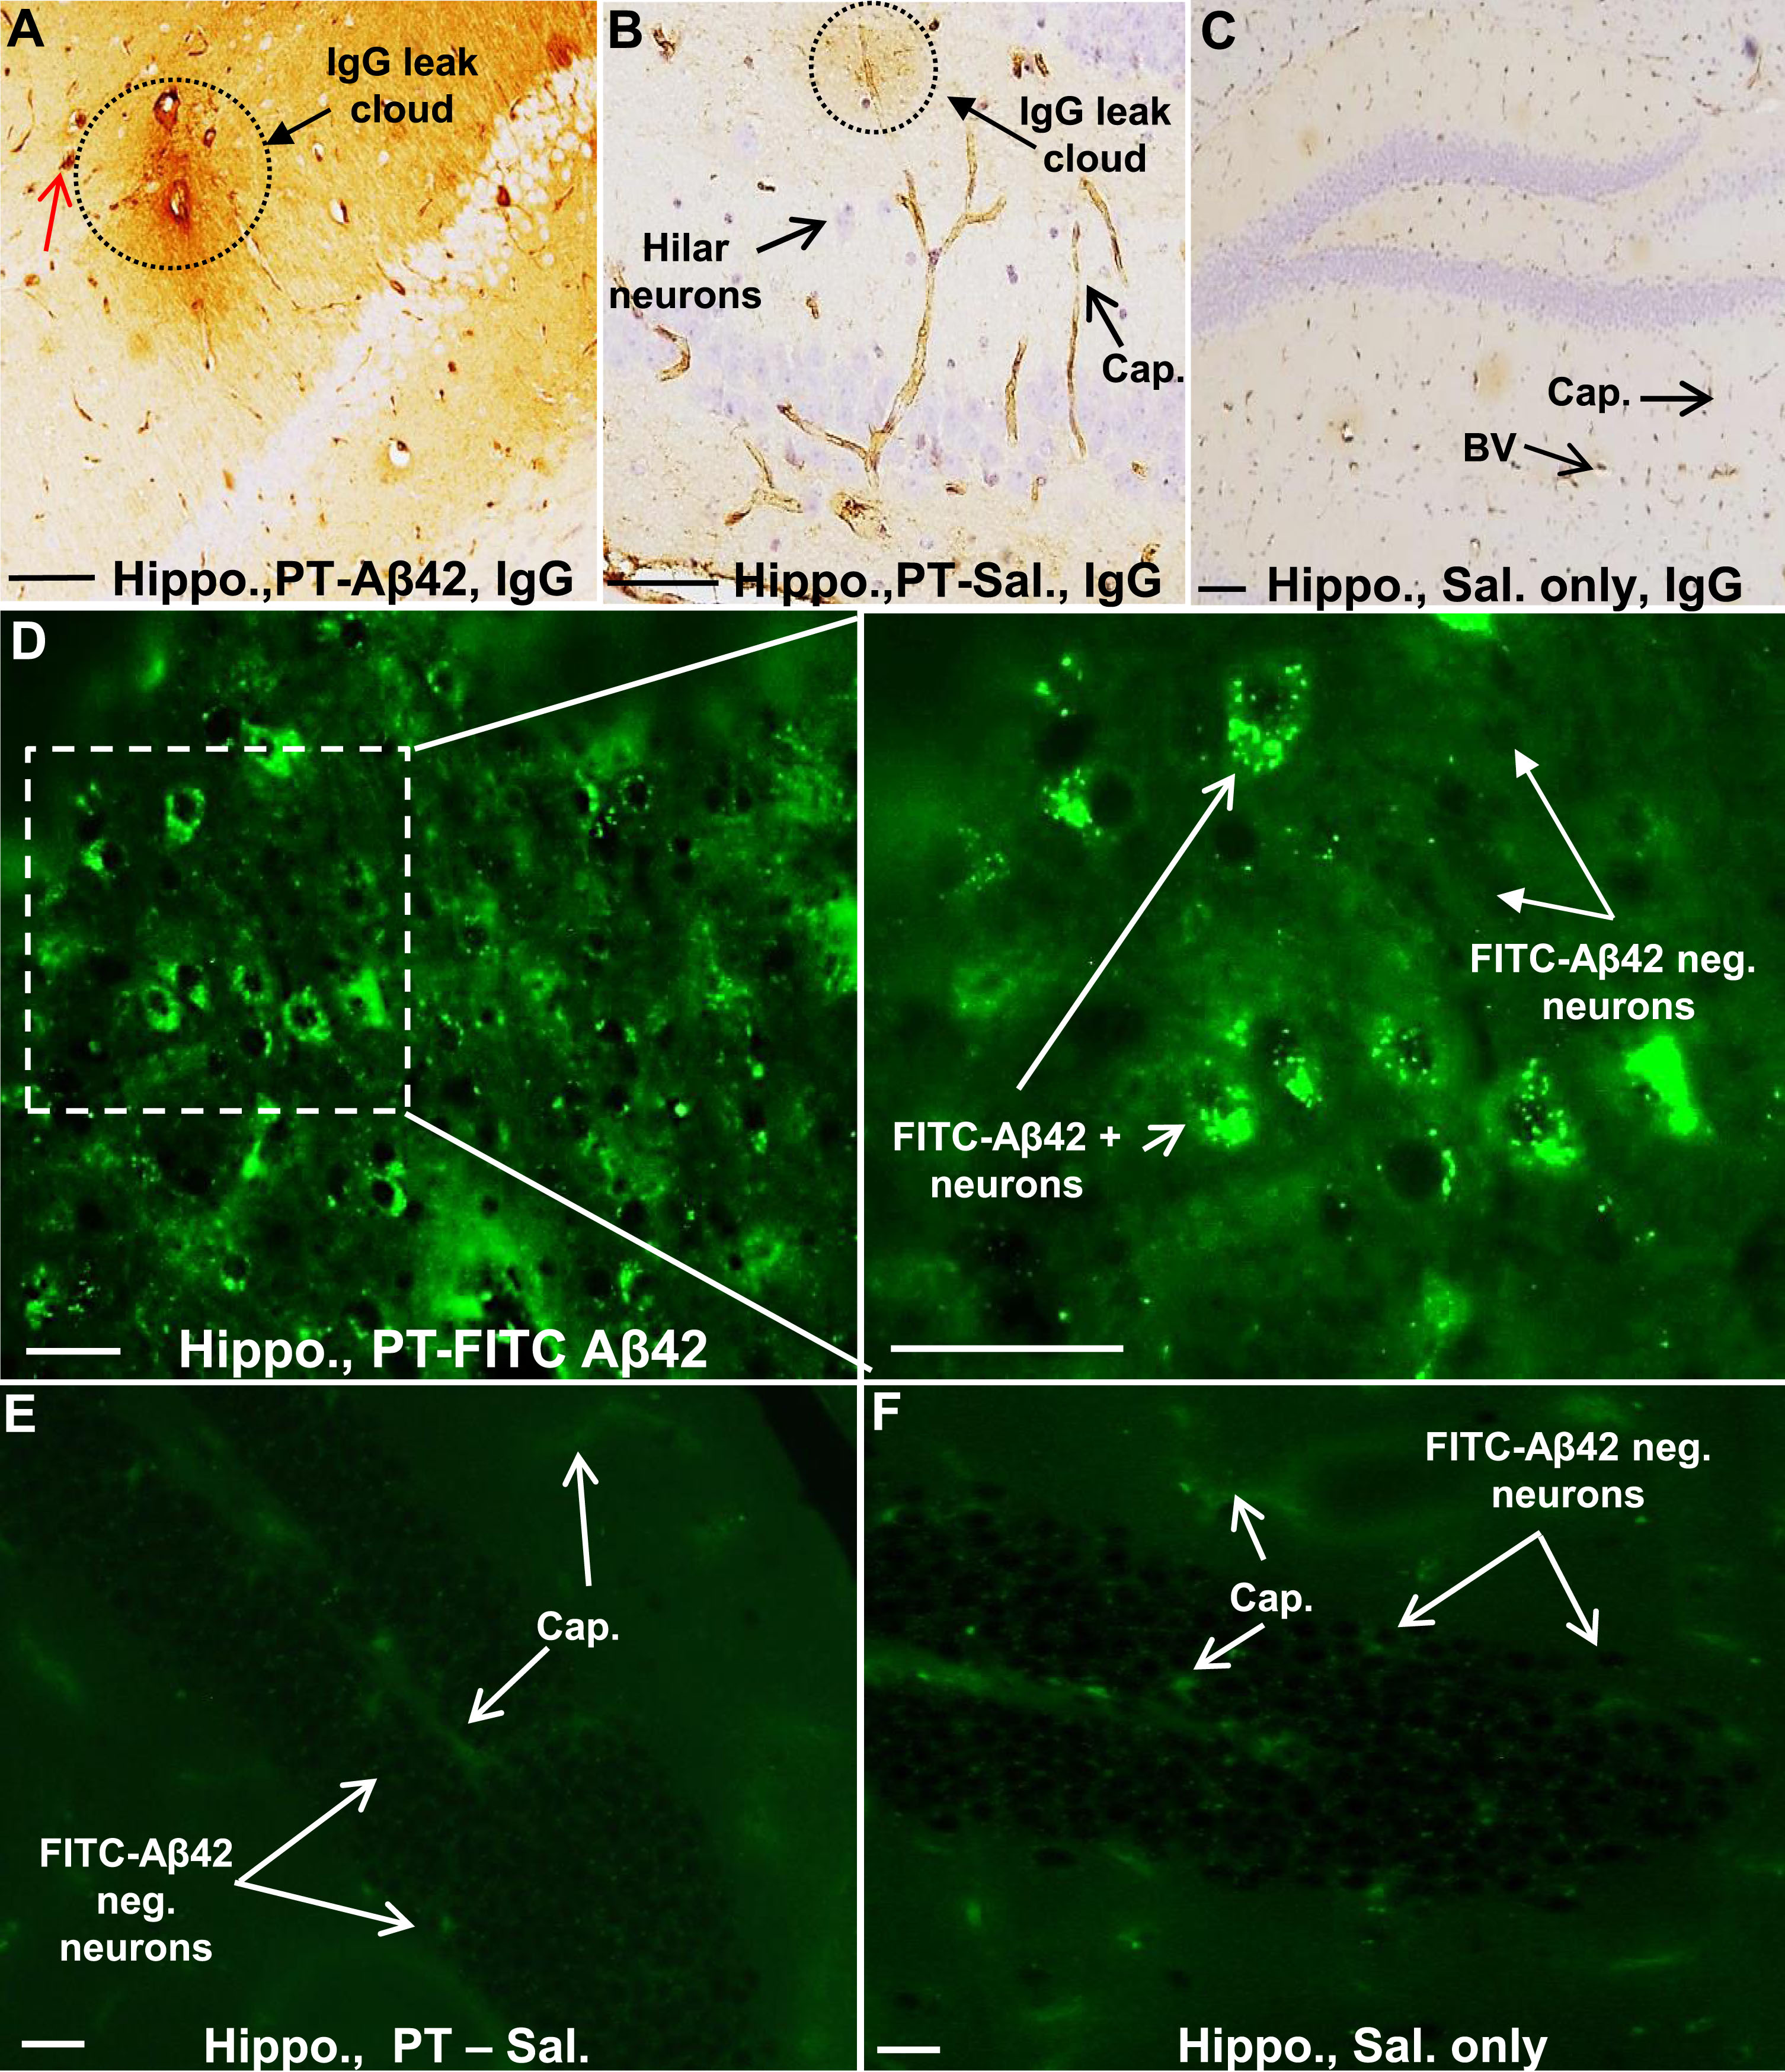 The hippocampal region of PT -A
β42 mice also showed increased BBB breakdown and intraneuronal accumulation of FITC-A
β42. A–C) Representative images from paraffin-embedded sections through the hippocampal region of PT-Aβ42 mice showing extensive BBB leak of IgG compared to PT-only and Sal-only groups. D) Representative images from PT-FITC-Aβ42-treated mice demonstrating intraneuronal accumulation of FITC-Aβ42 in hippocampal hilar neurons. E, F) The hippocampal region of the PT-Sal and Sal-only mice lacked FITC-positive fluorescence. Hippo, hippocampus; BV, blood vessel; Cap, capillary. Scale bar = 50μm.